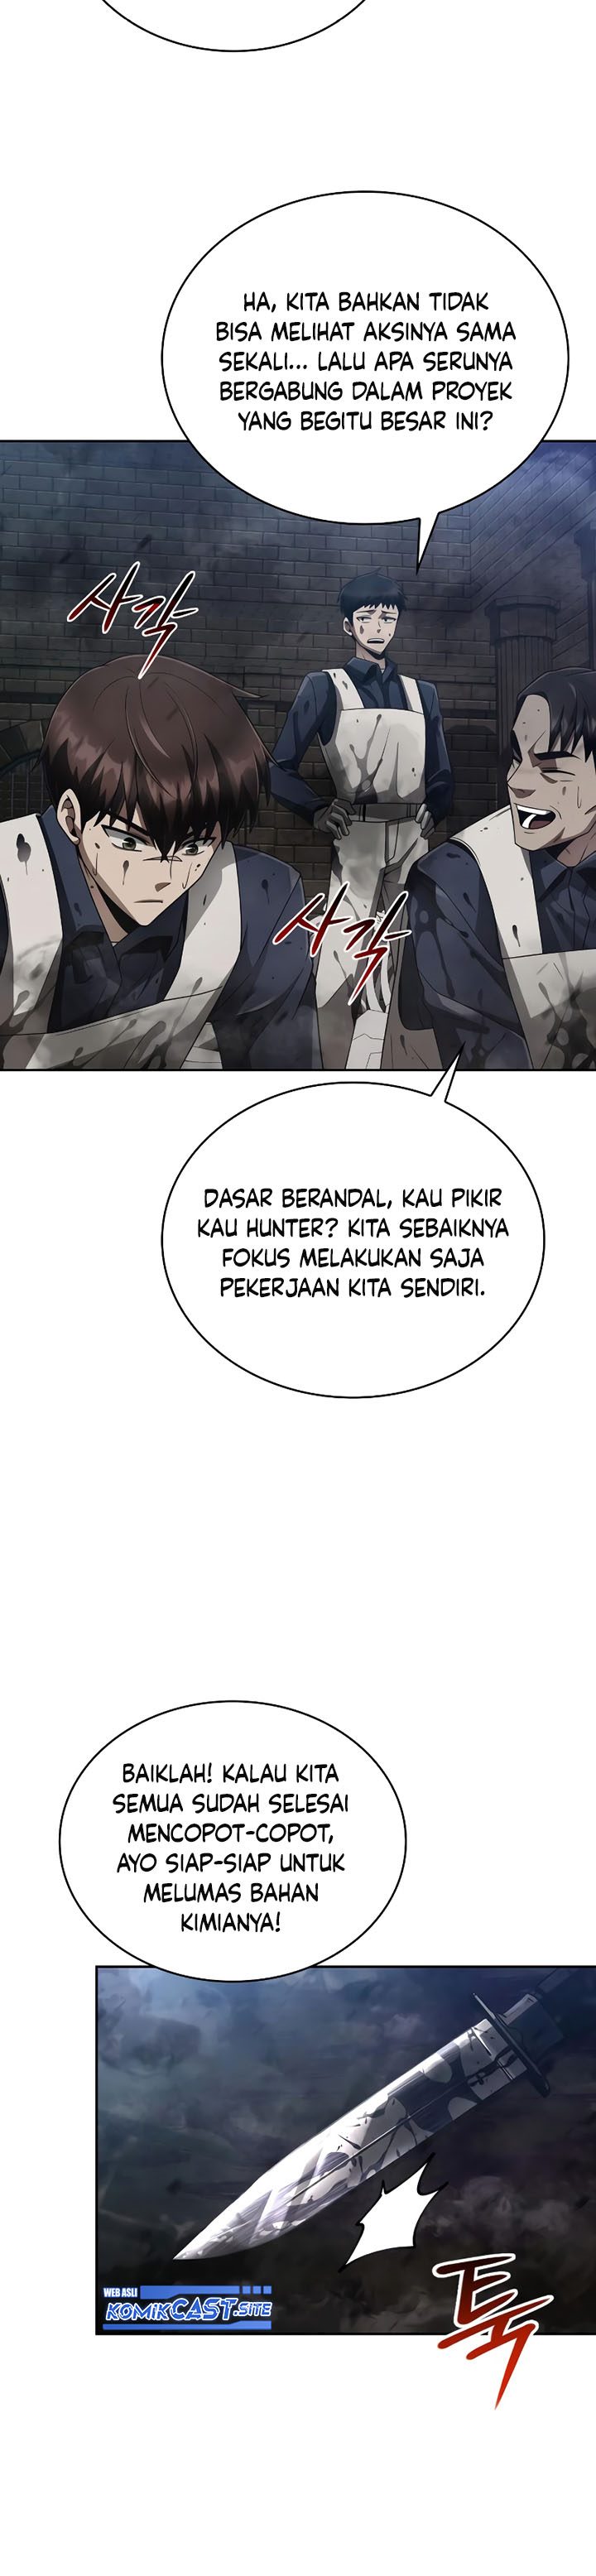 Dilarang COPAS - situs resmi www.mangacanblog.com - Komik clever cleaning life of the returned genius hunter 016 - chapter 16 17 Indonesia clever cleaning life of the returned genius hunter 016 - chapter 16 Terbaru 3|Baca Manga Komik Indonesia|Mangacan